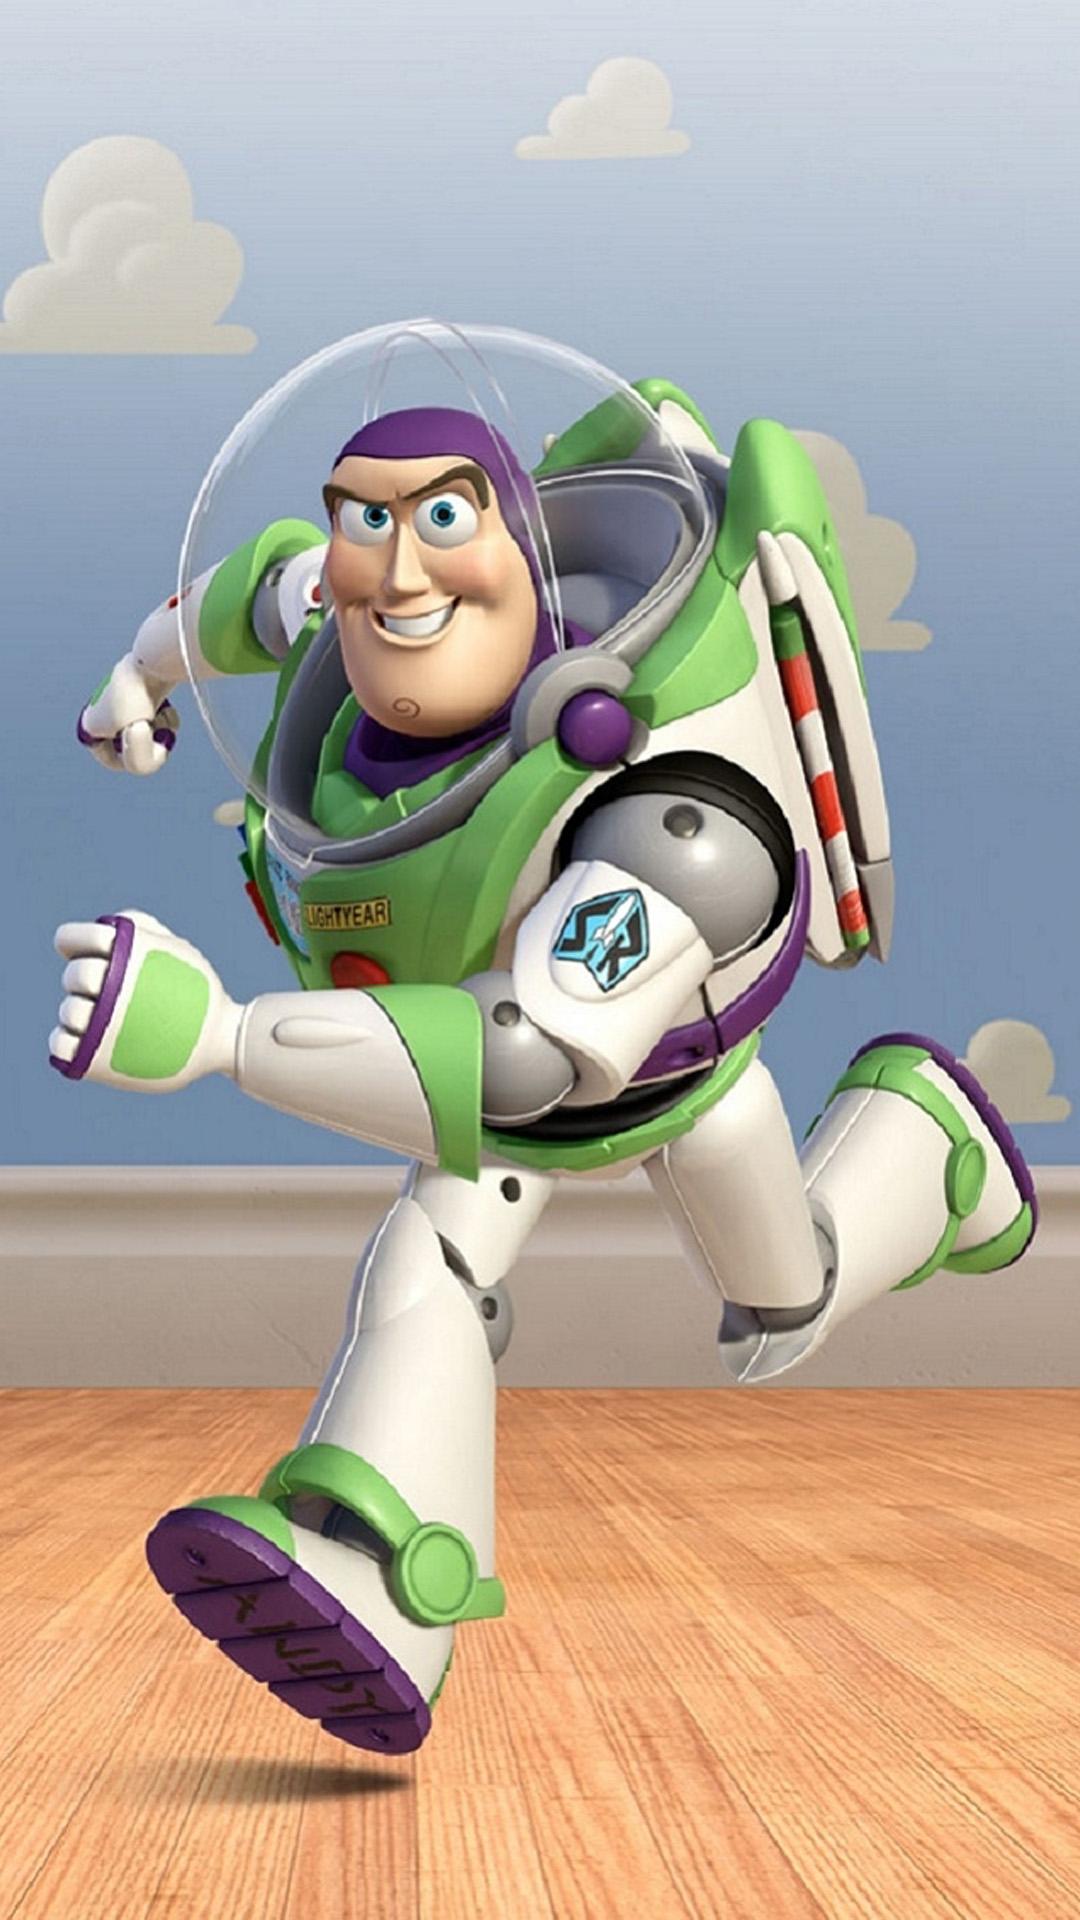 Wallpaper ID 475776  Movie Toy Story Phone Wallpaper Woody Toy Story  Buzz Lightyear 720x1280 free download